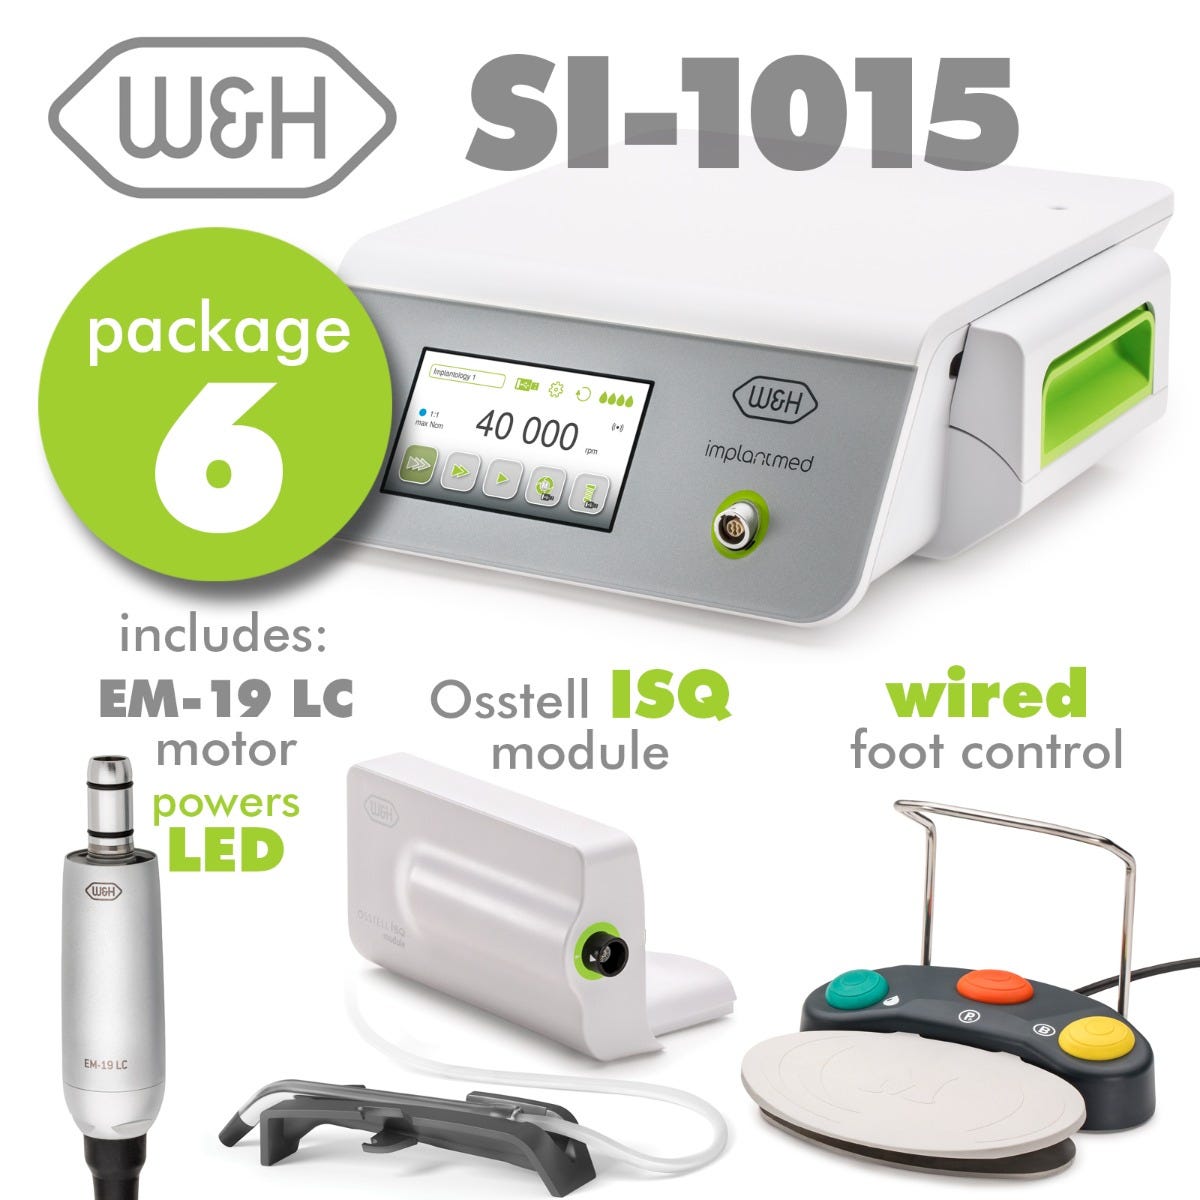 Implantmed Plus Set 6- Includes: SI-1015 Control Unit , EM-19LC Motor, Wired Foot Control, Osstell Module